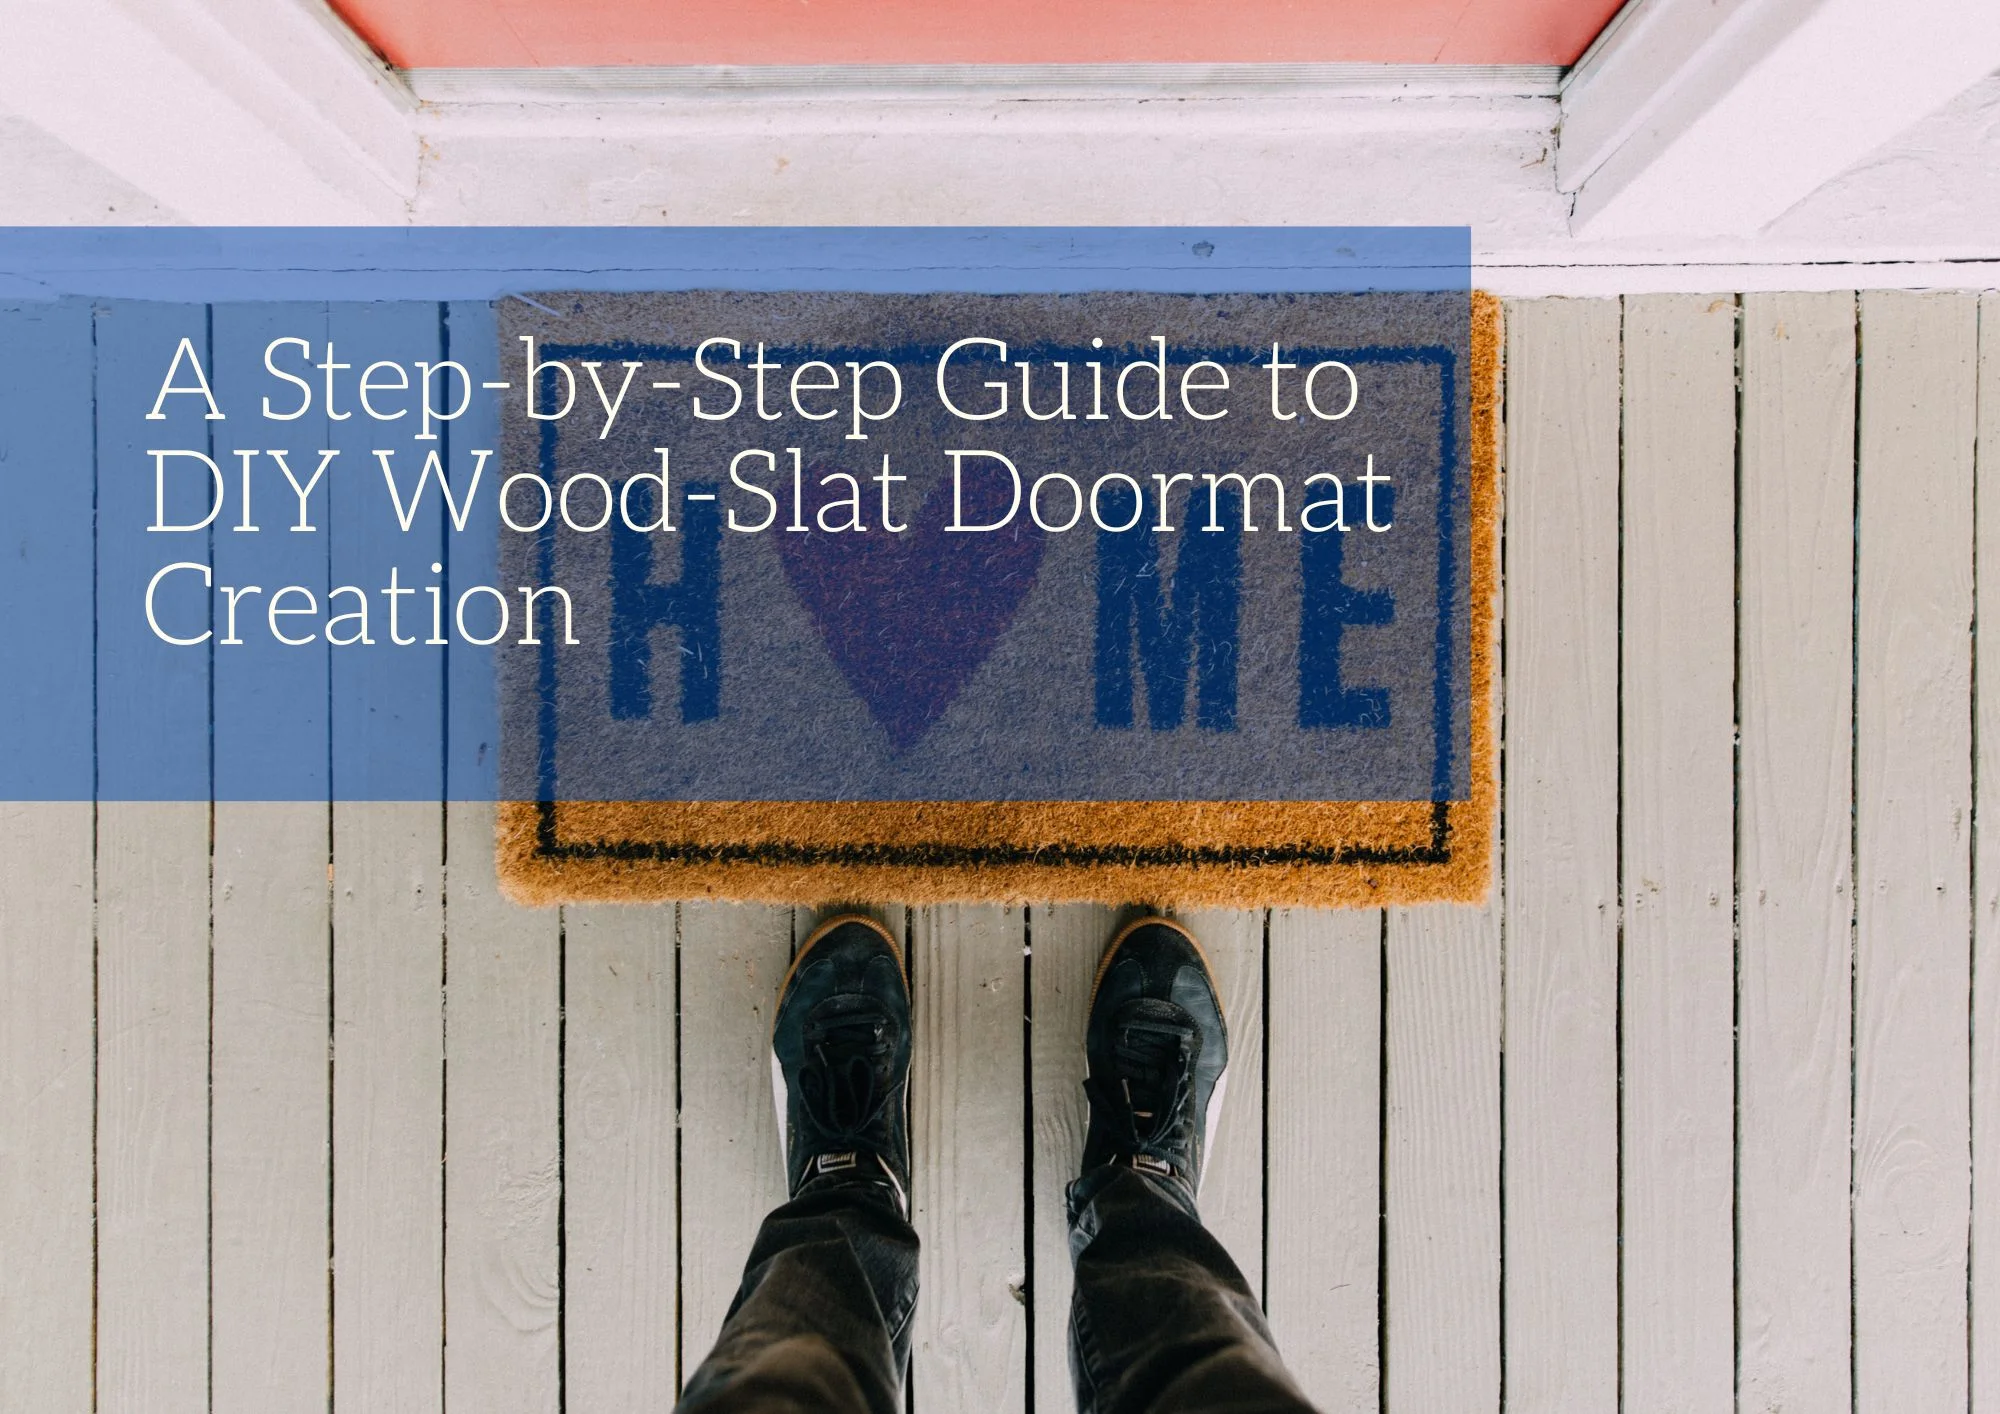 A Step-by-Step Guide to DIY Wood-Slat Doormat Creation